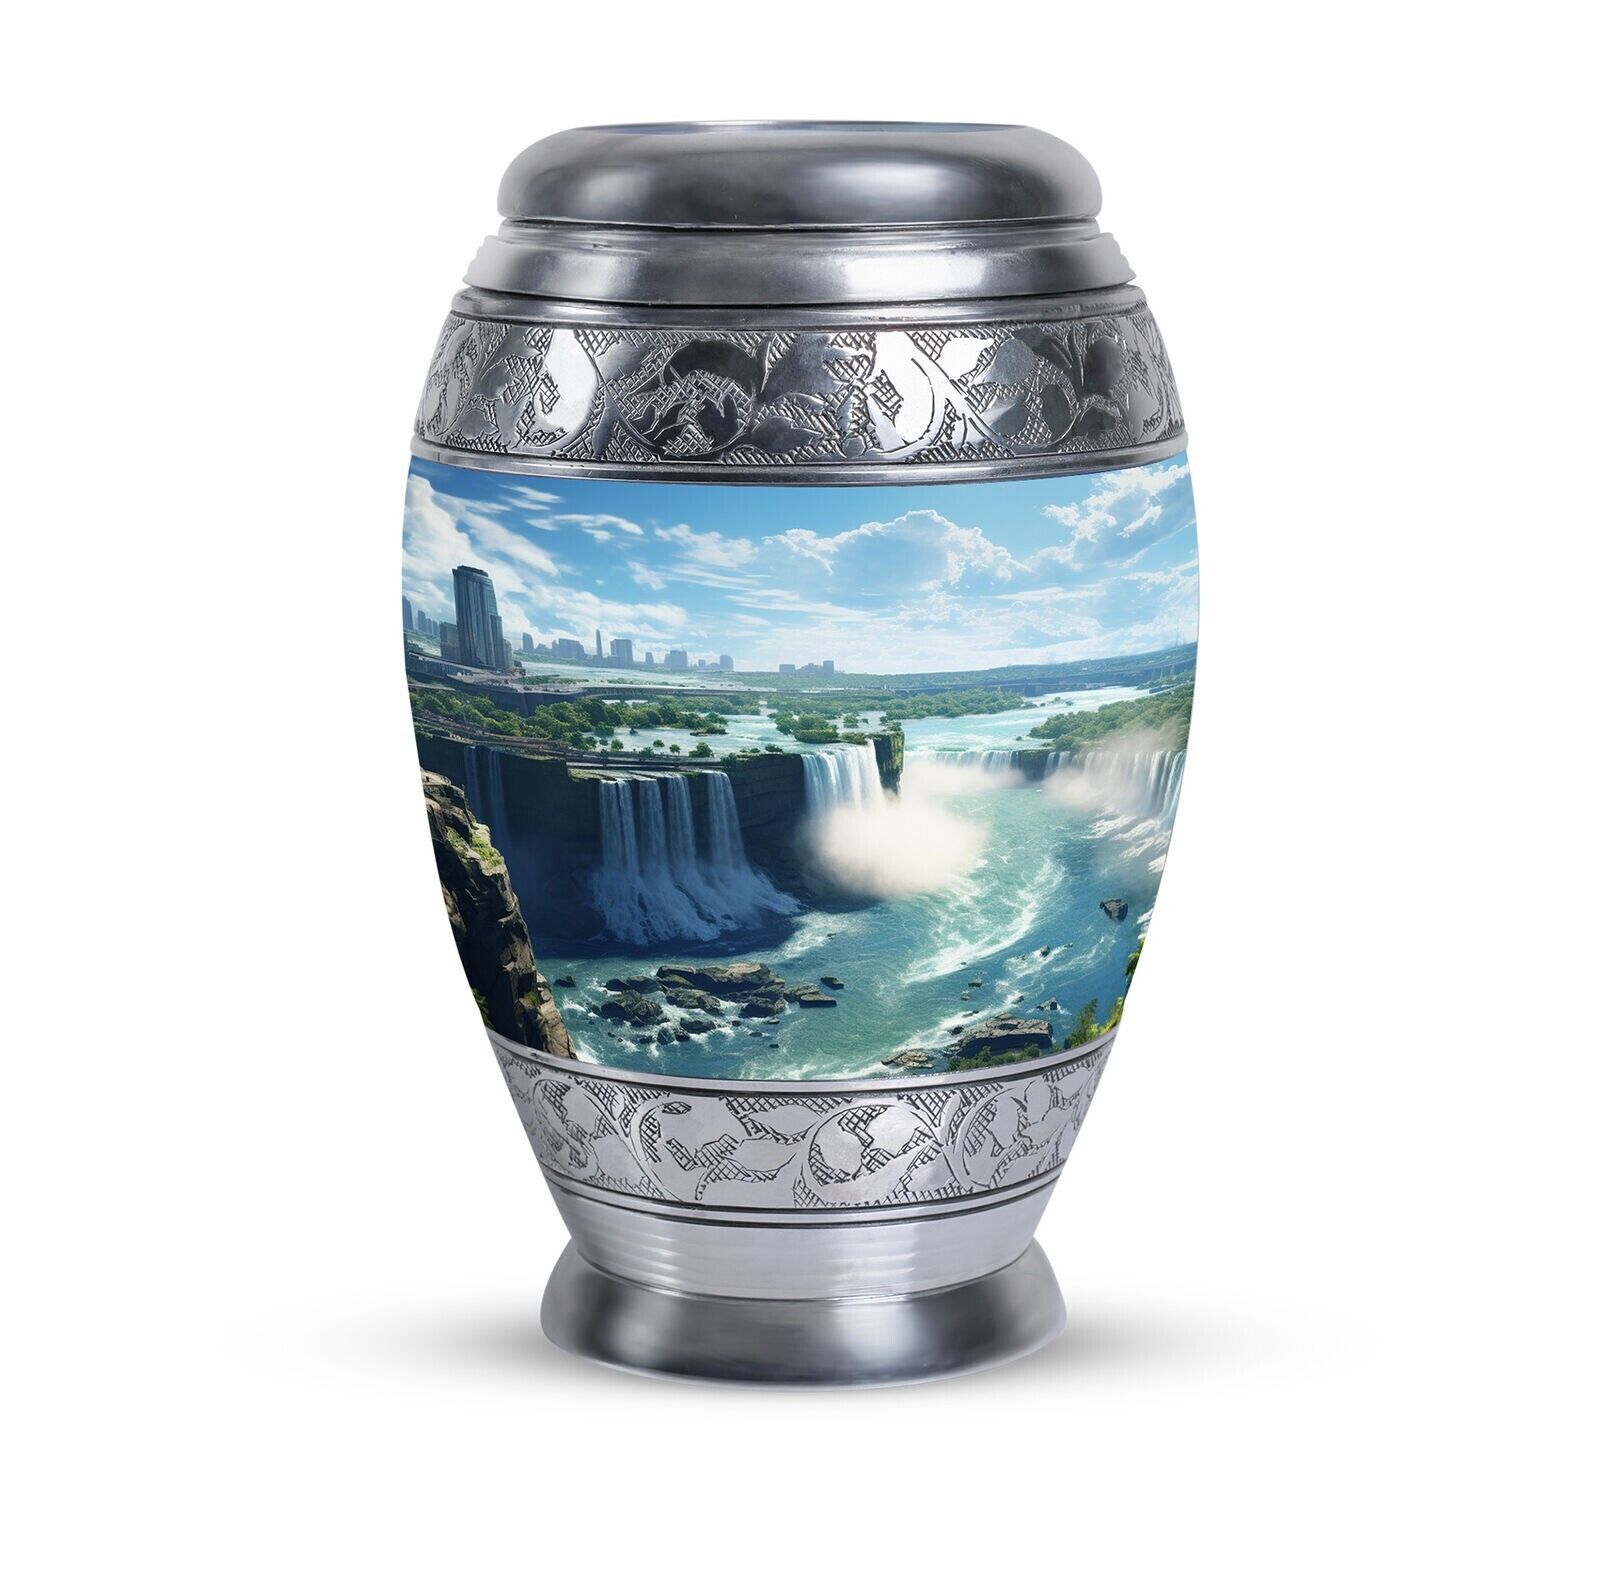 (10 Inch) Large Urns For The Ashes Painting Of Niagara Falls Affordable Funeral